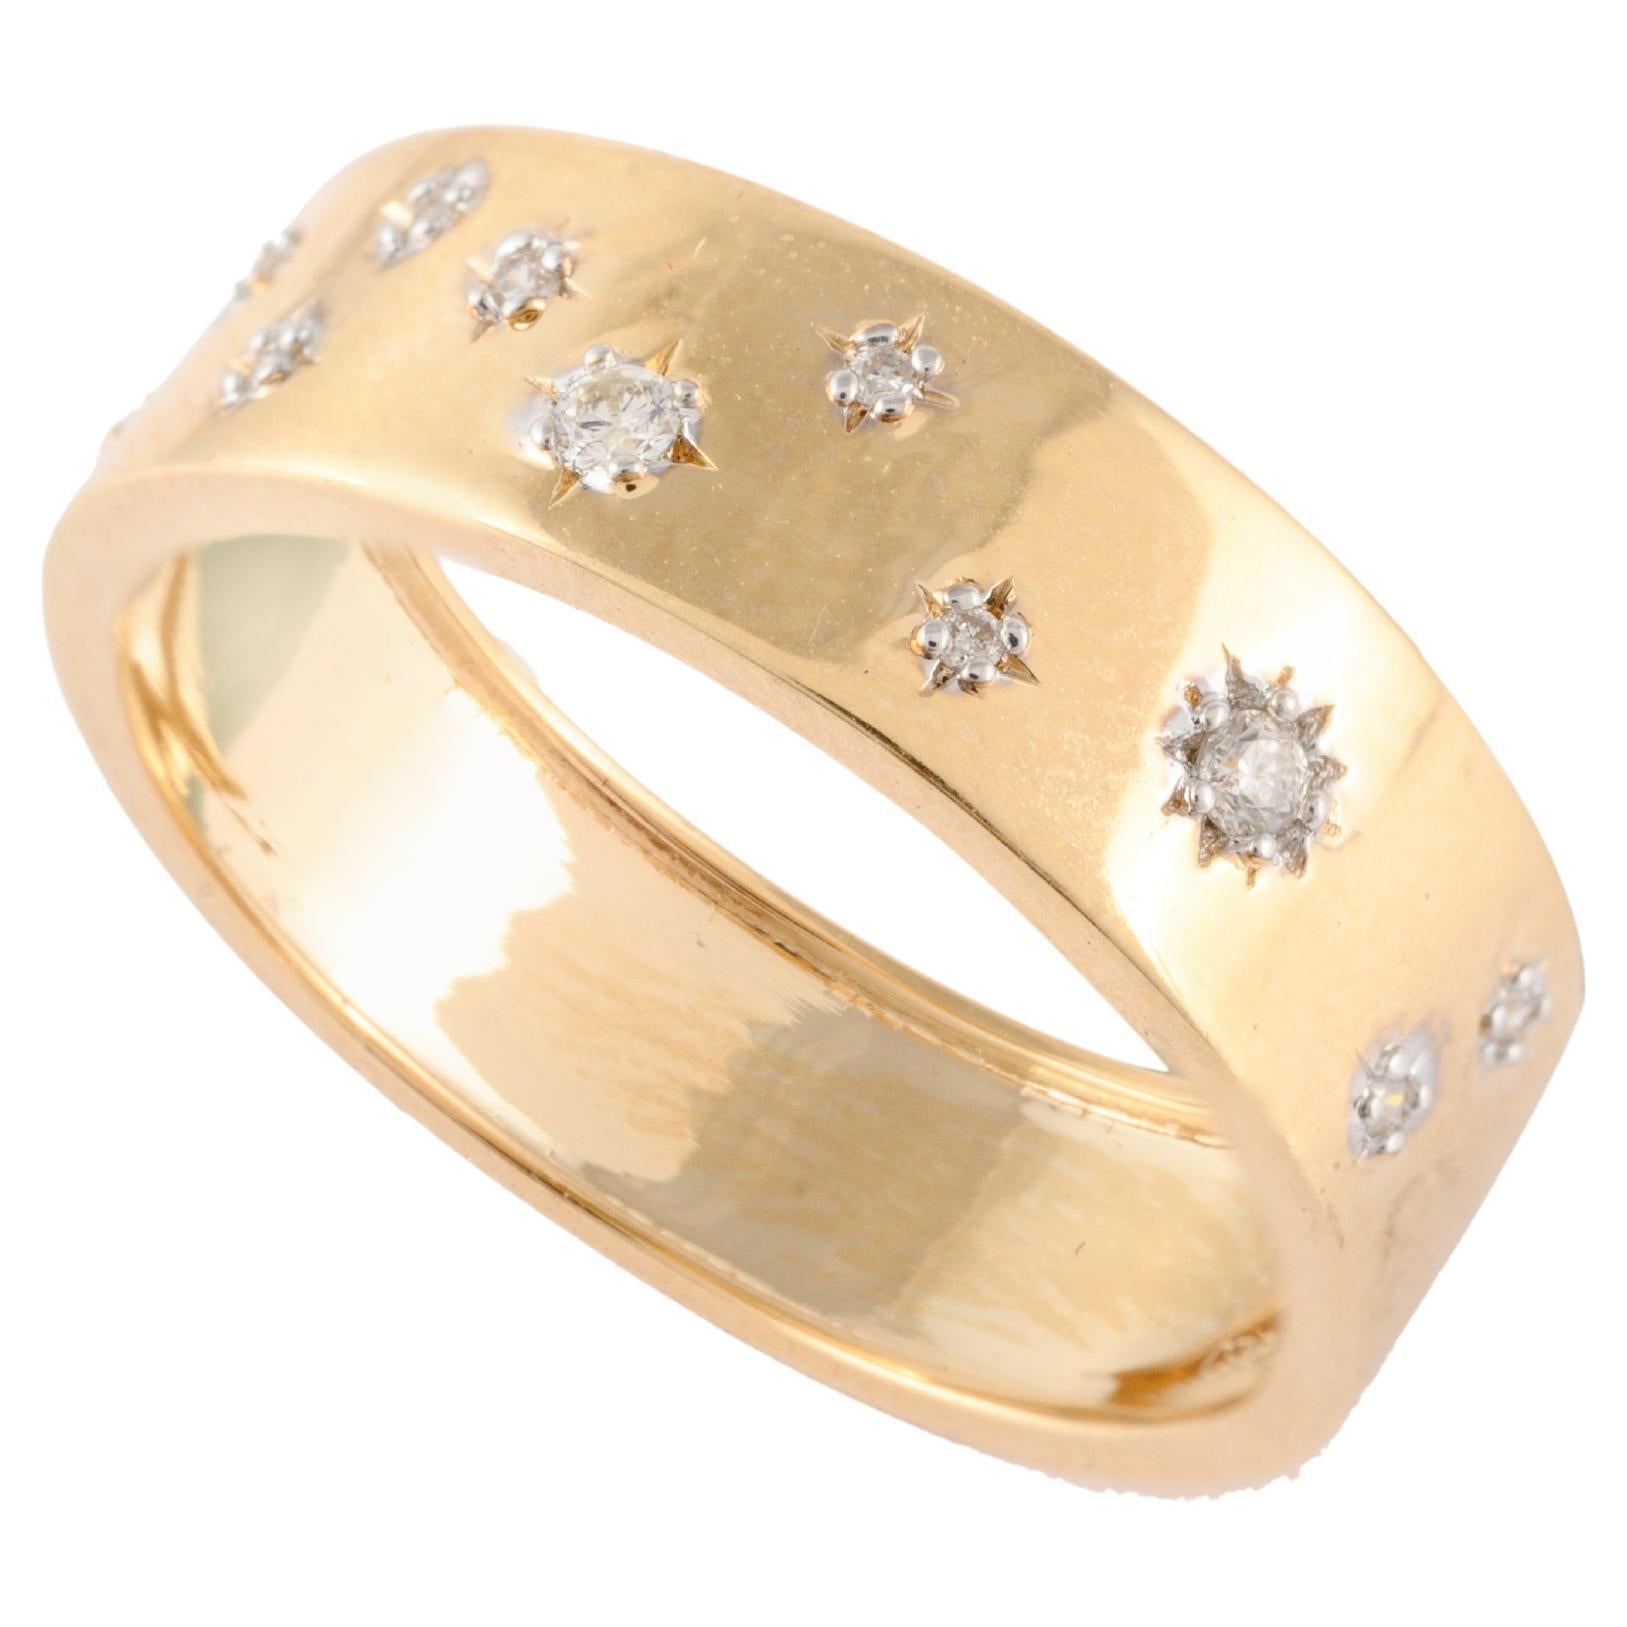 Genuine Diamond Stardust Unisex Band Ring in 18k Solid Yellow Gold